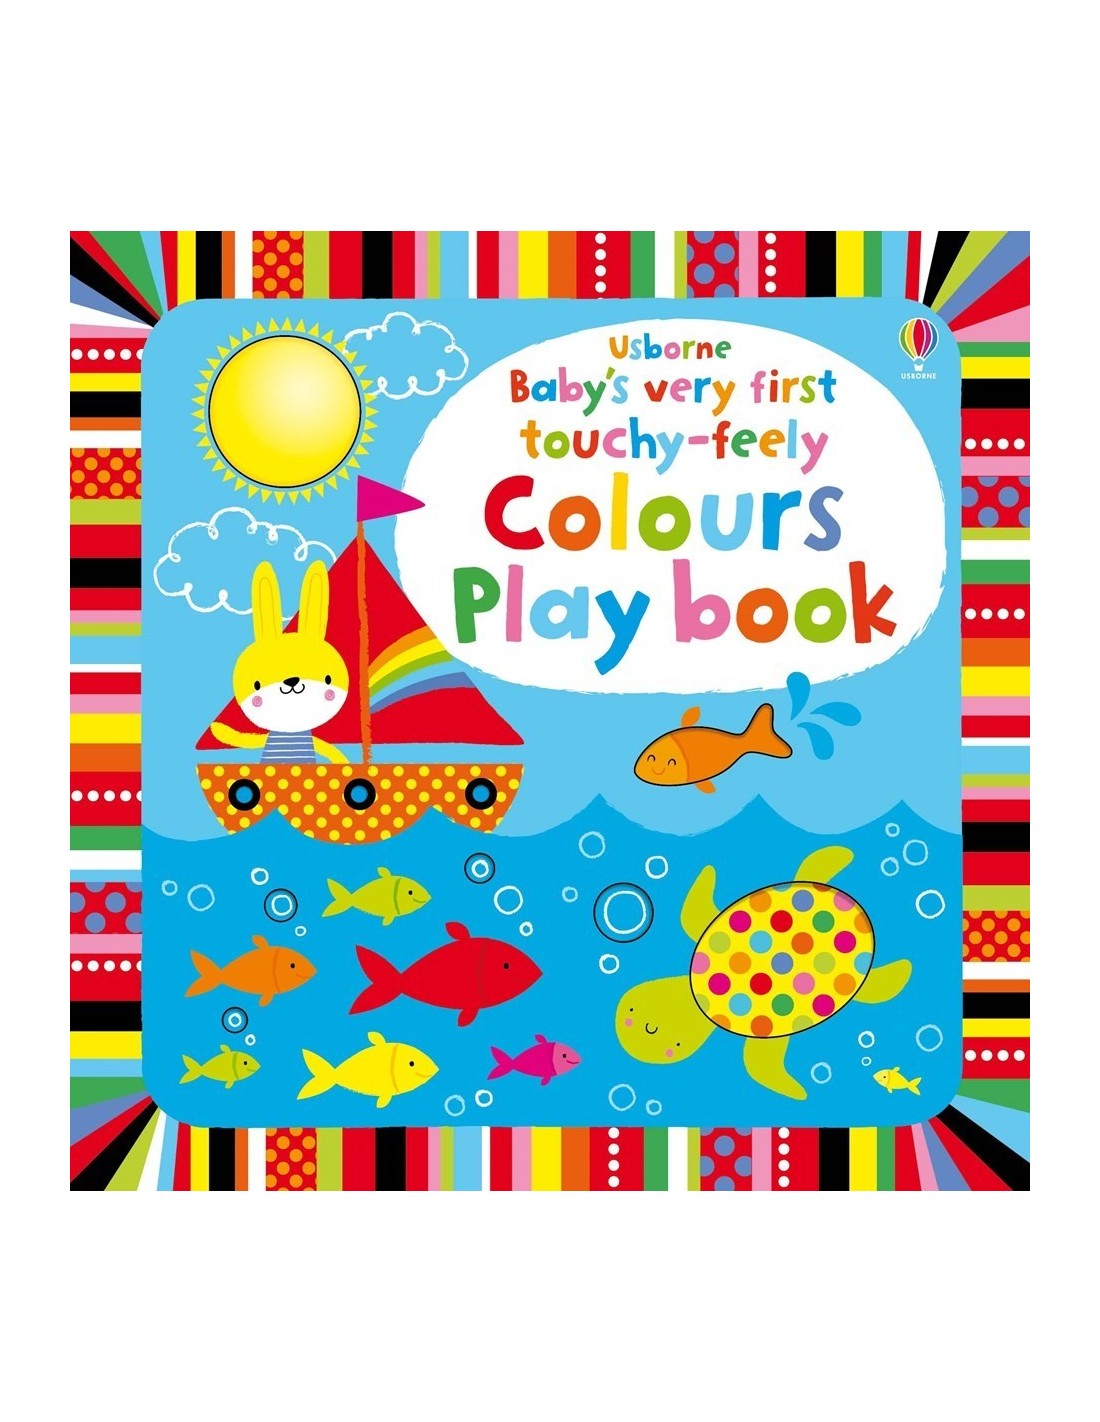 Baby's very first touchy-feely colours play book